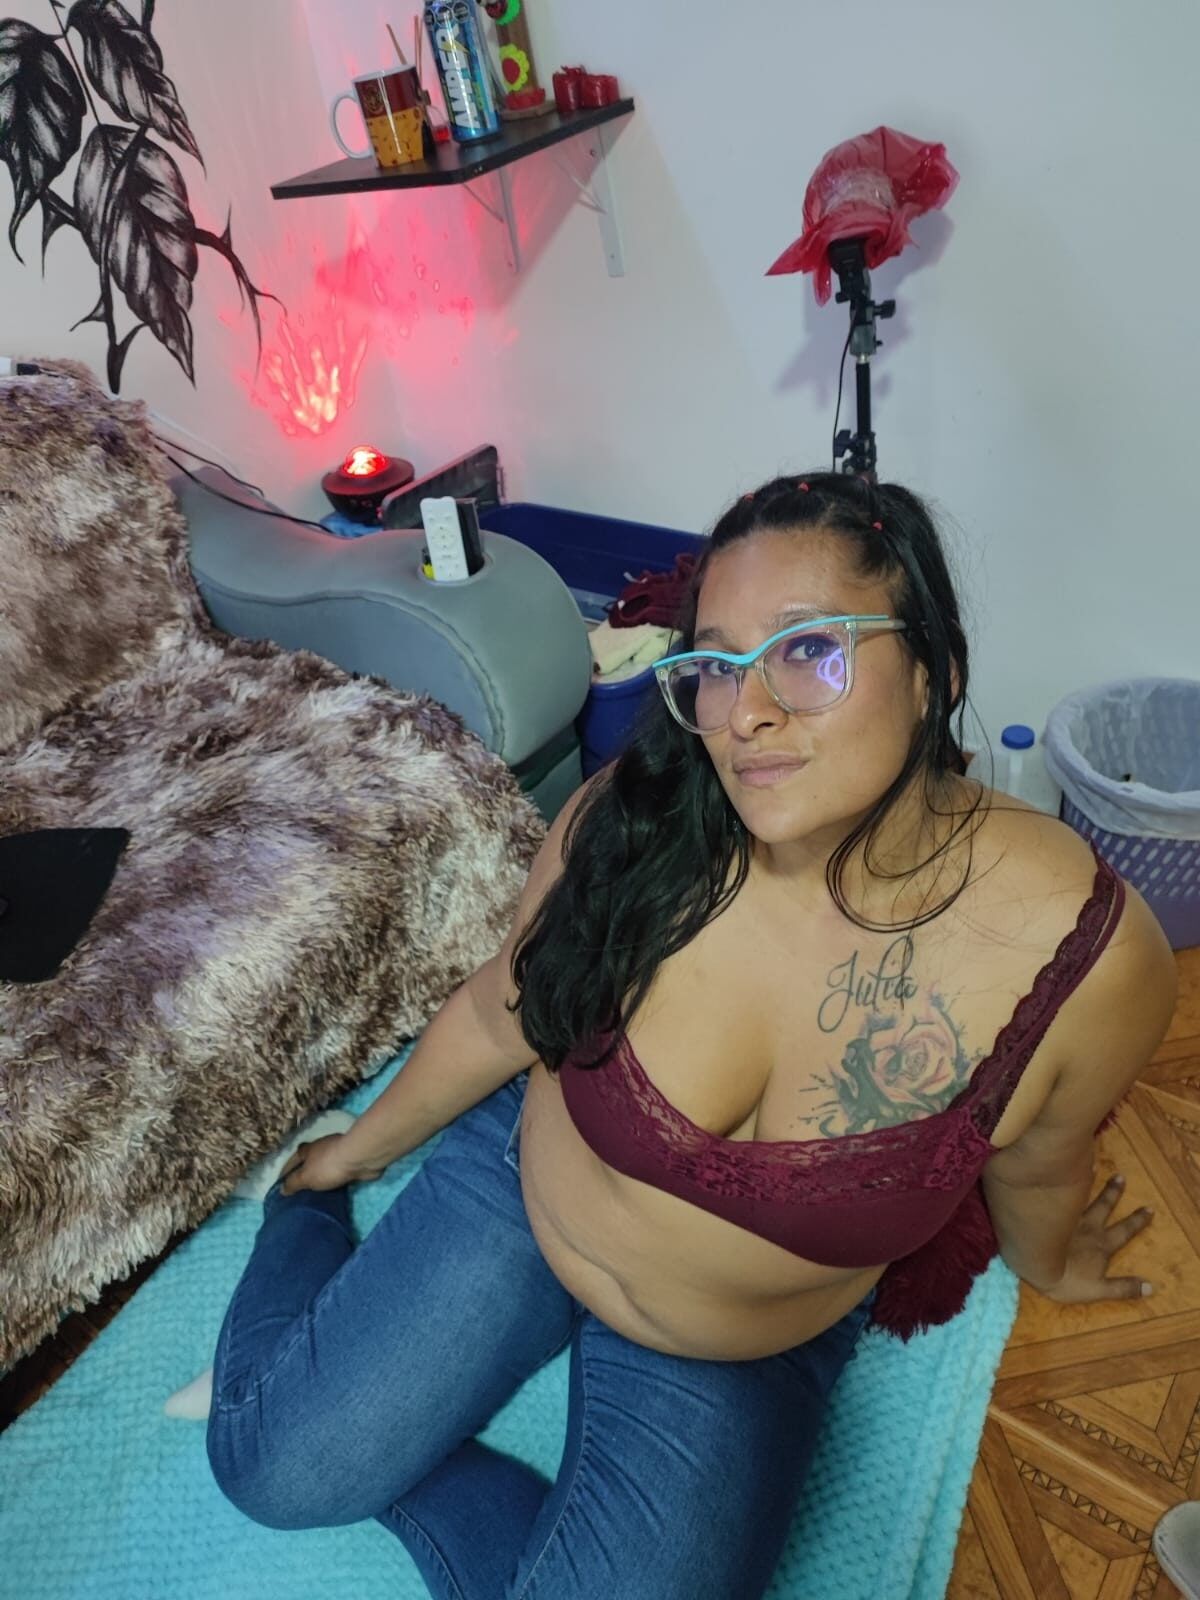 search on live camera and we have fun together ReedxRosee #8